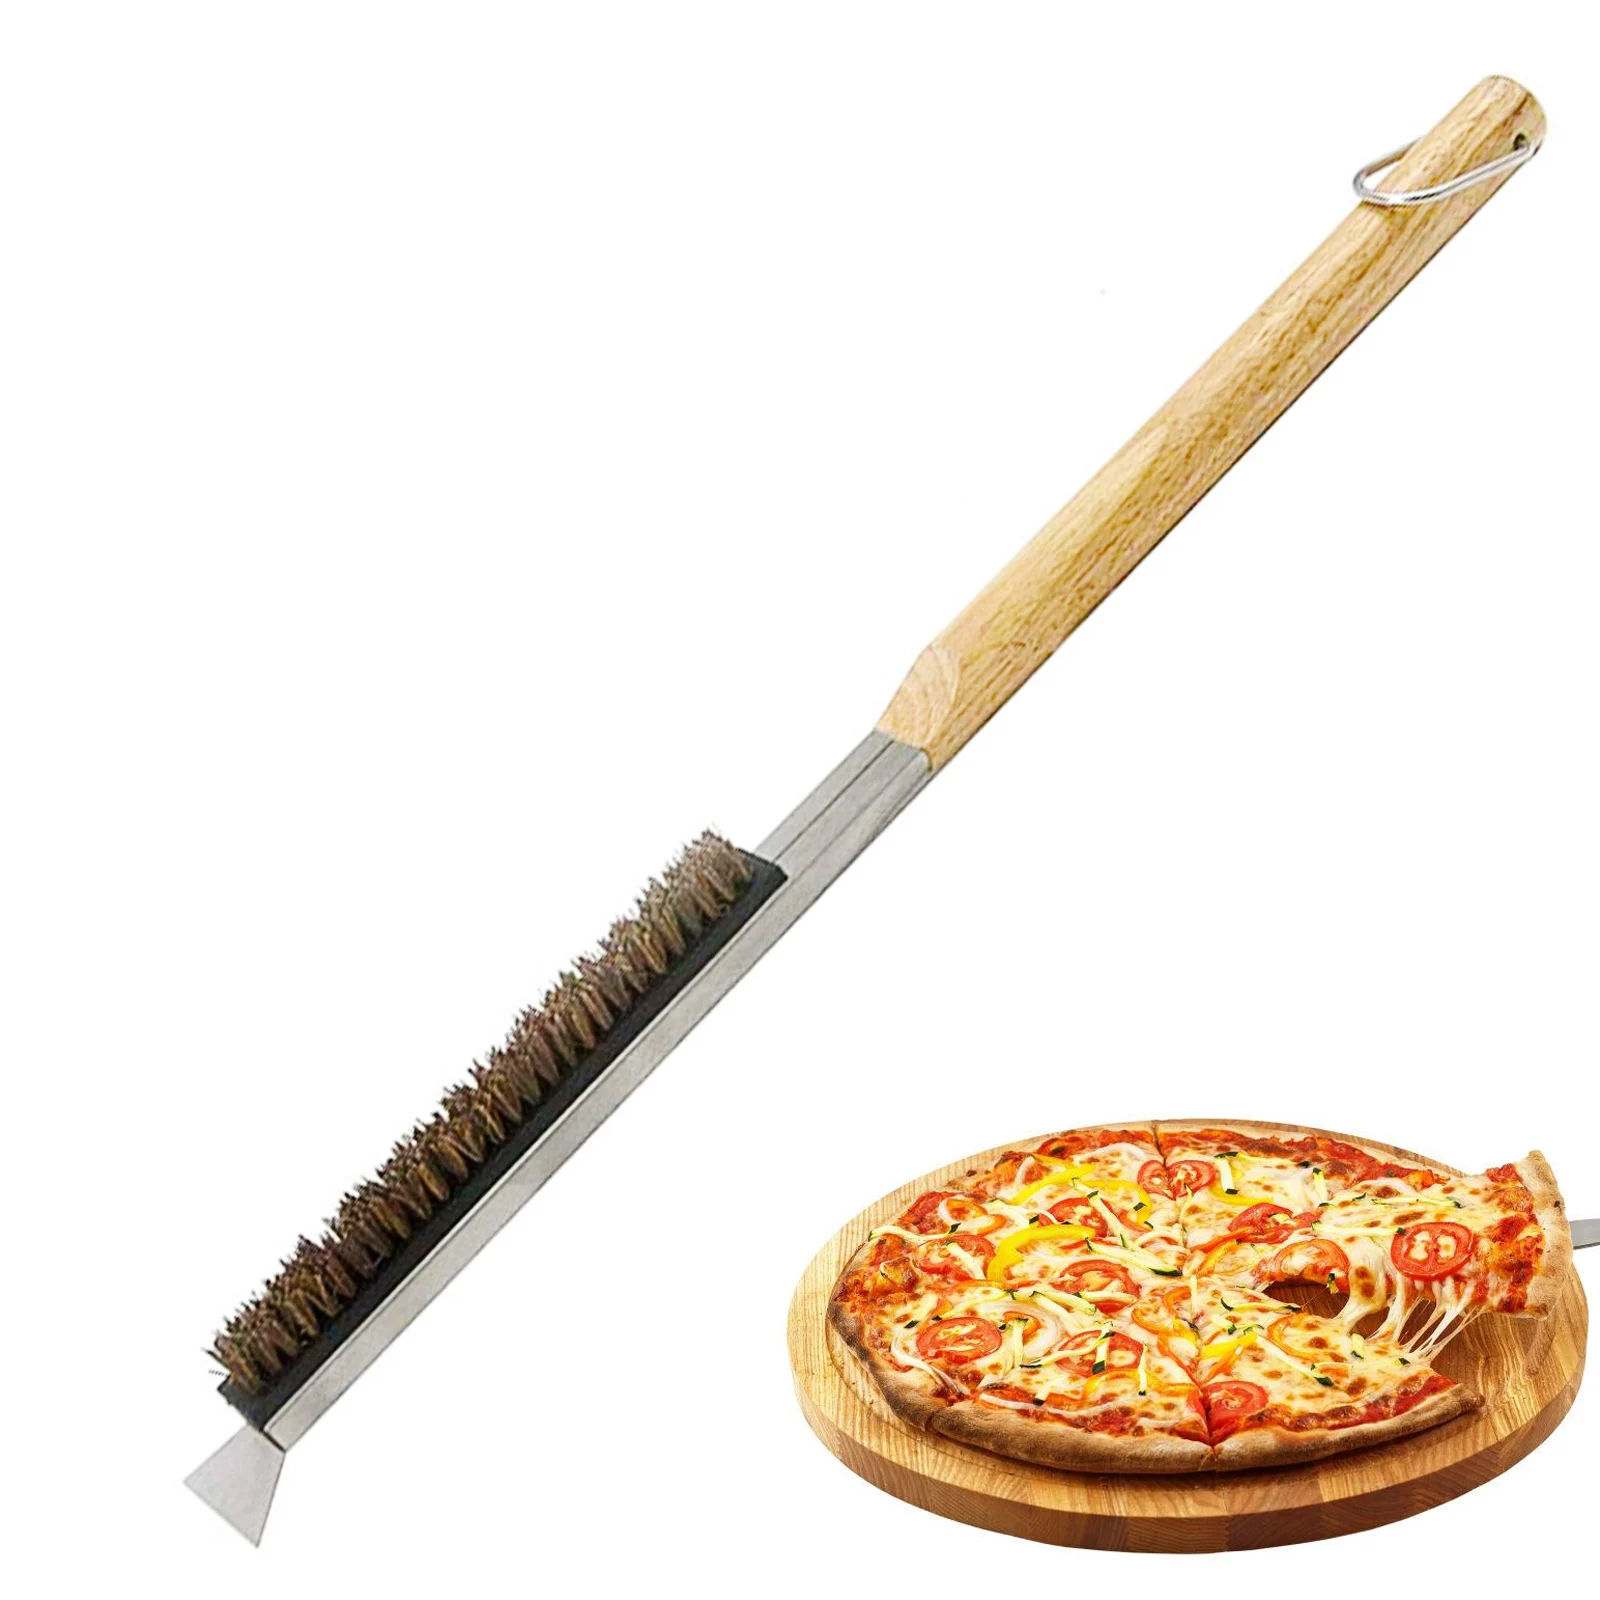 Pizza Oven Stone Brush Coir Bristle Wood Handle Stainless Steel Scraper BBQ Grill Cleaning Oven Small Brush Kitchen Utensils HOT